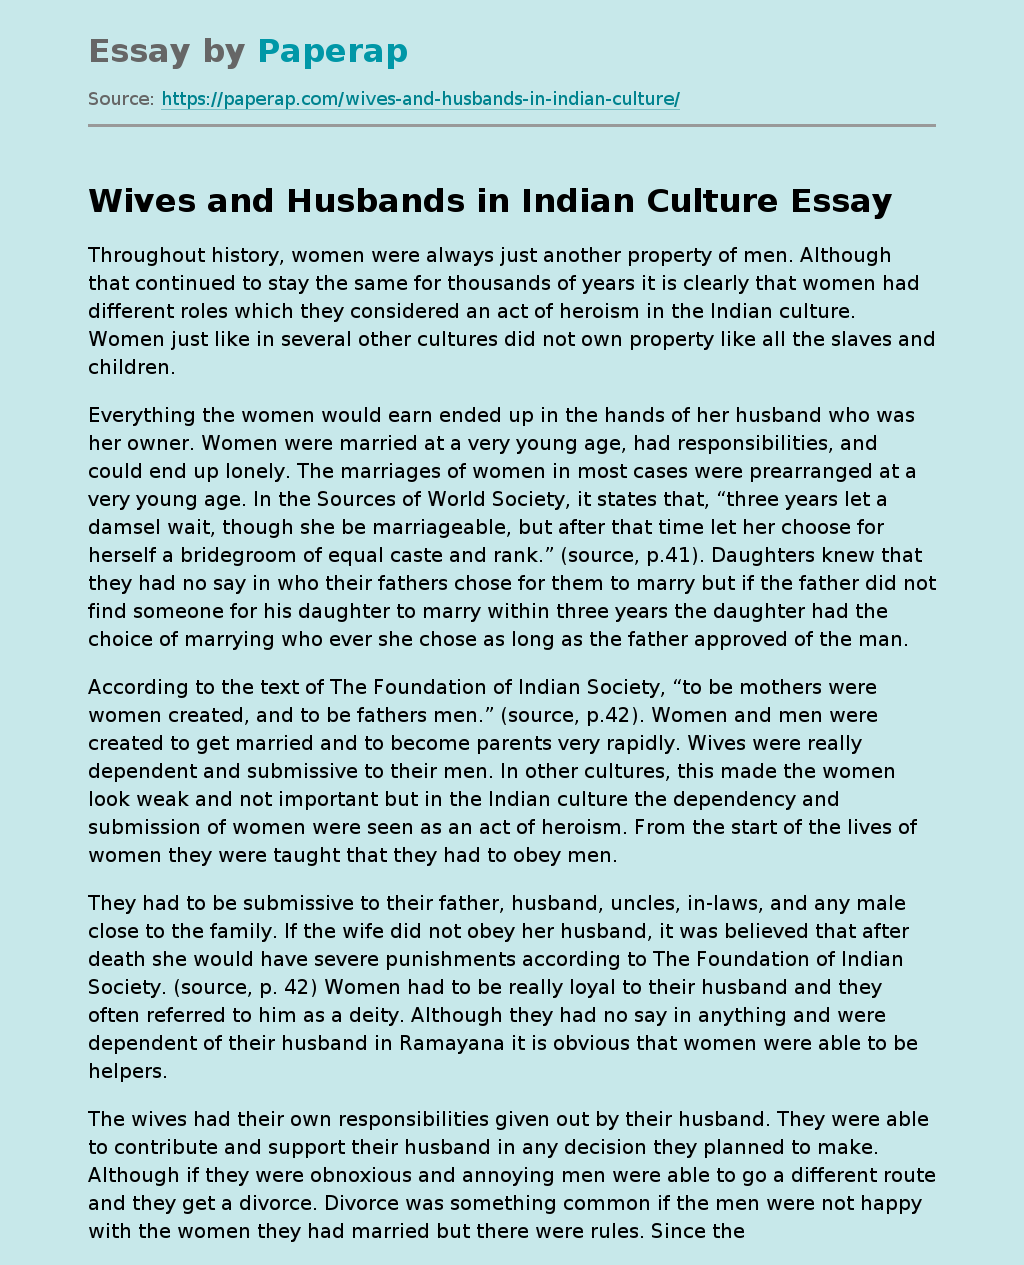 Wives and Husbands in Indian Culture